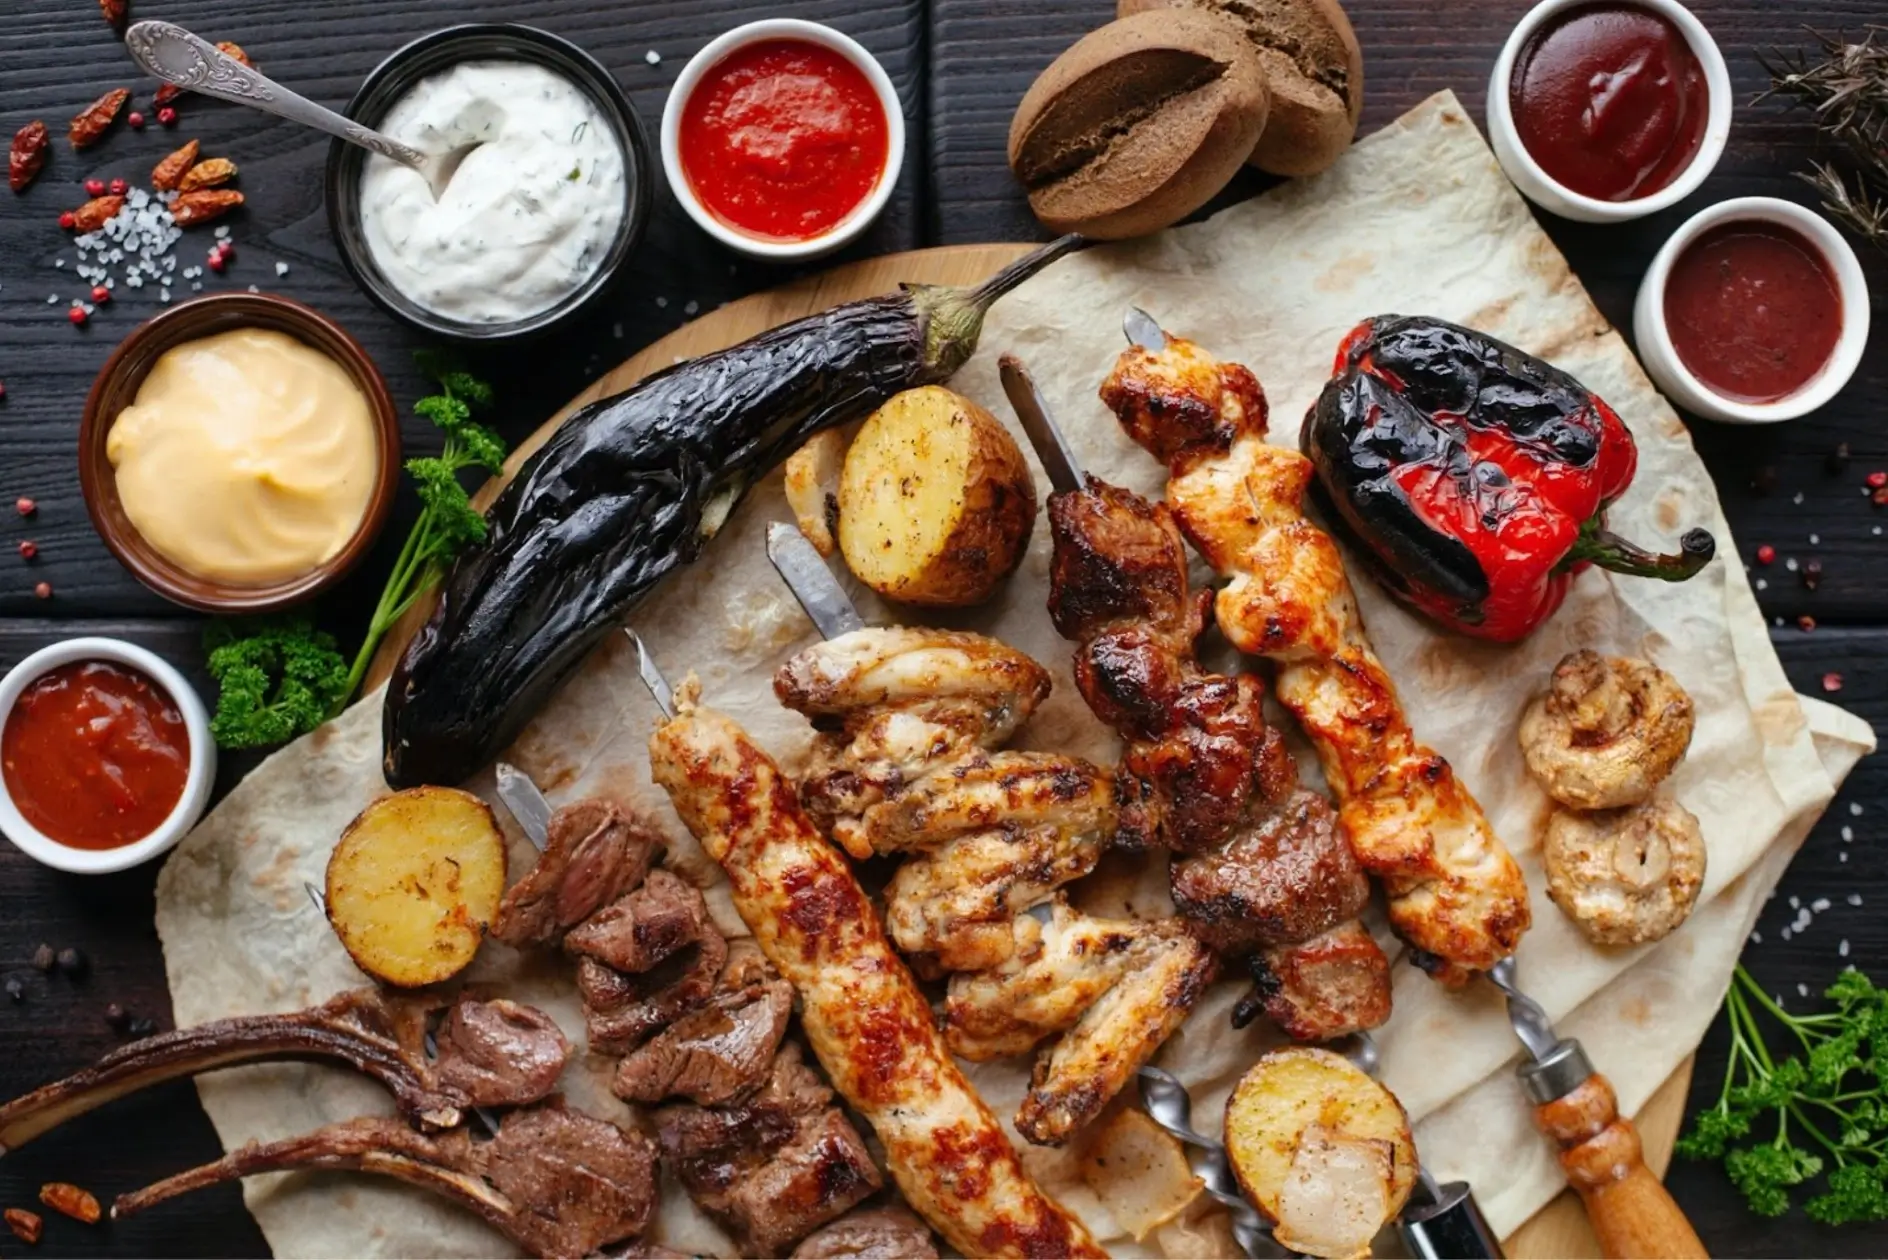 Barbequed meats, eggplant, and red pepper on a platter surrounded by small bowls of dipping sauces.